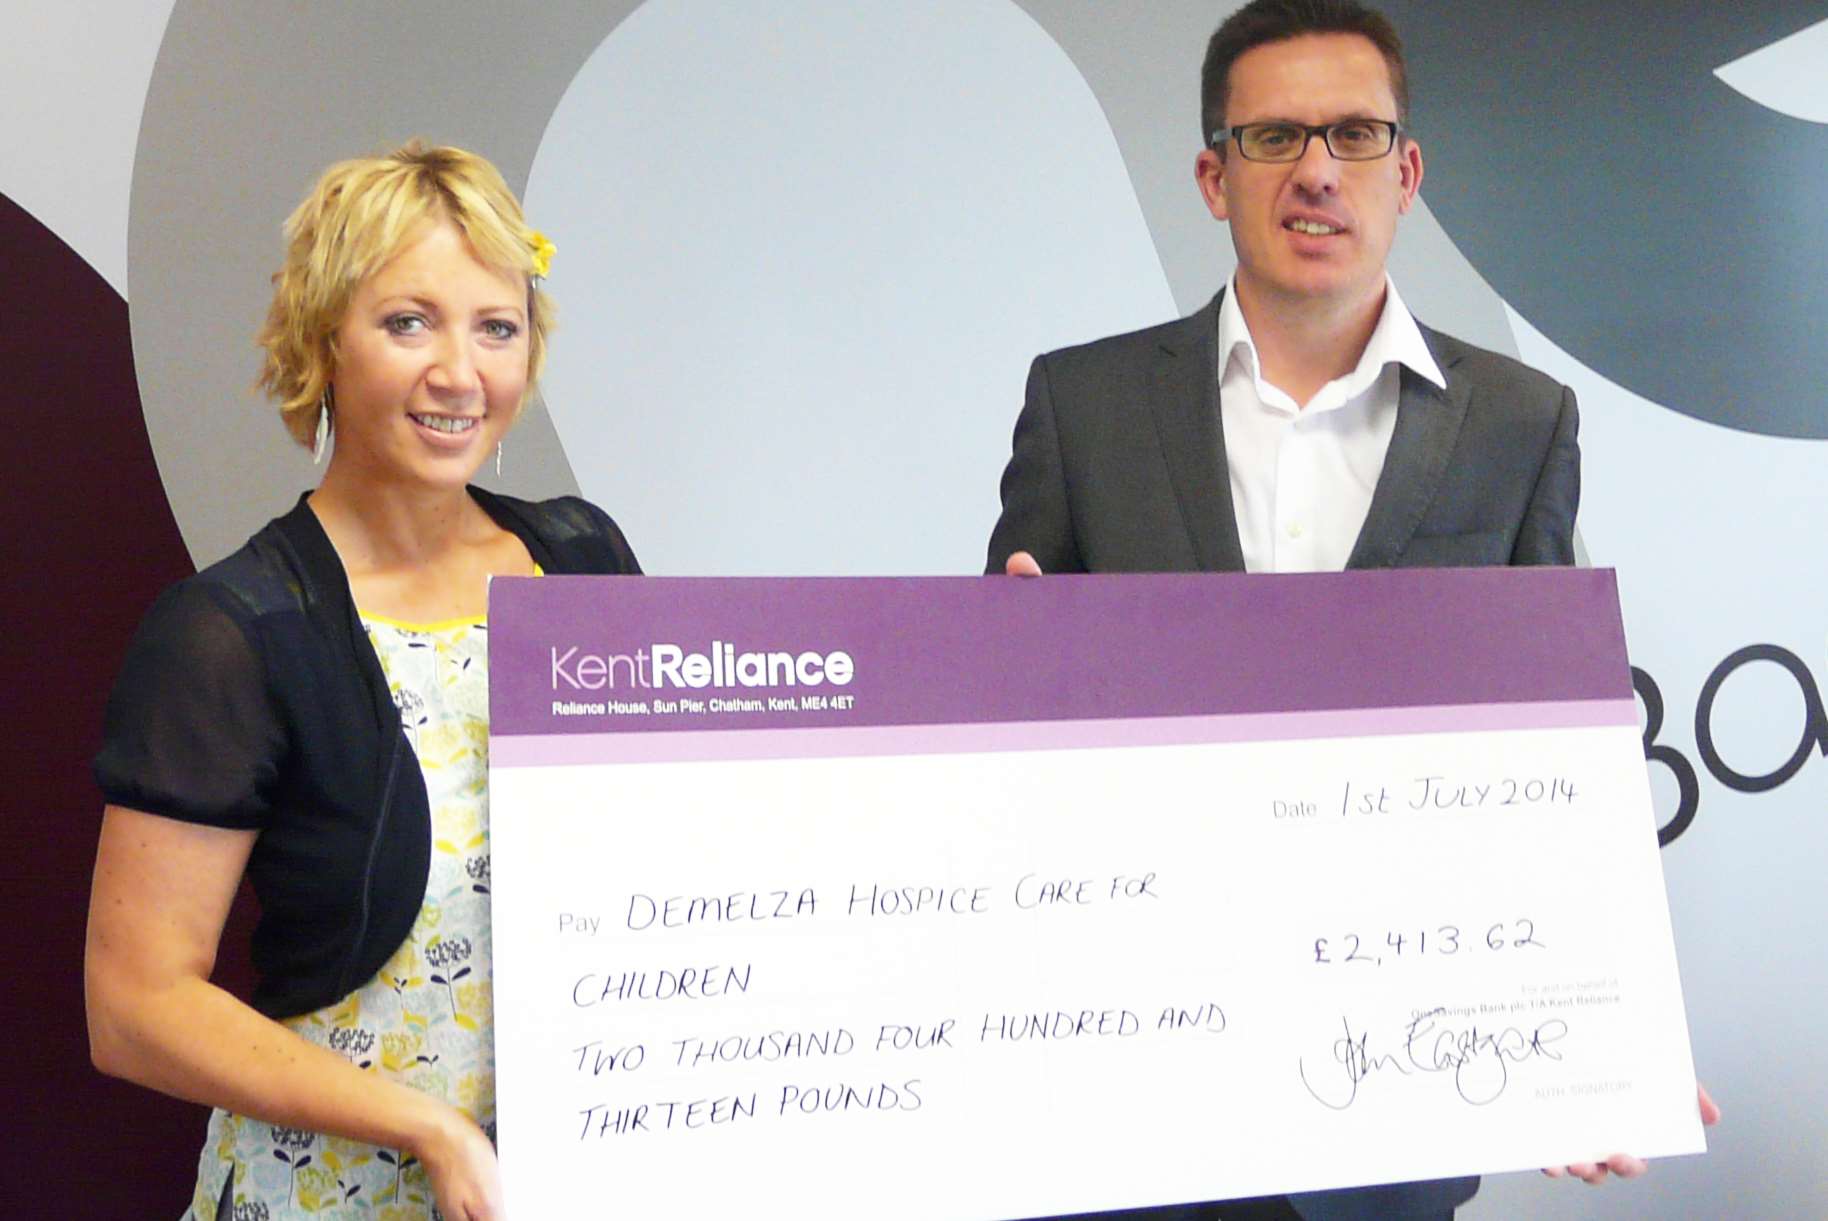 Kent Reliance's John Eastgate hands over the cheque to Natalie Tegg of Demelza